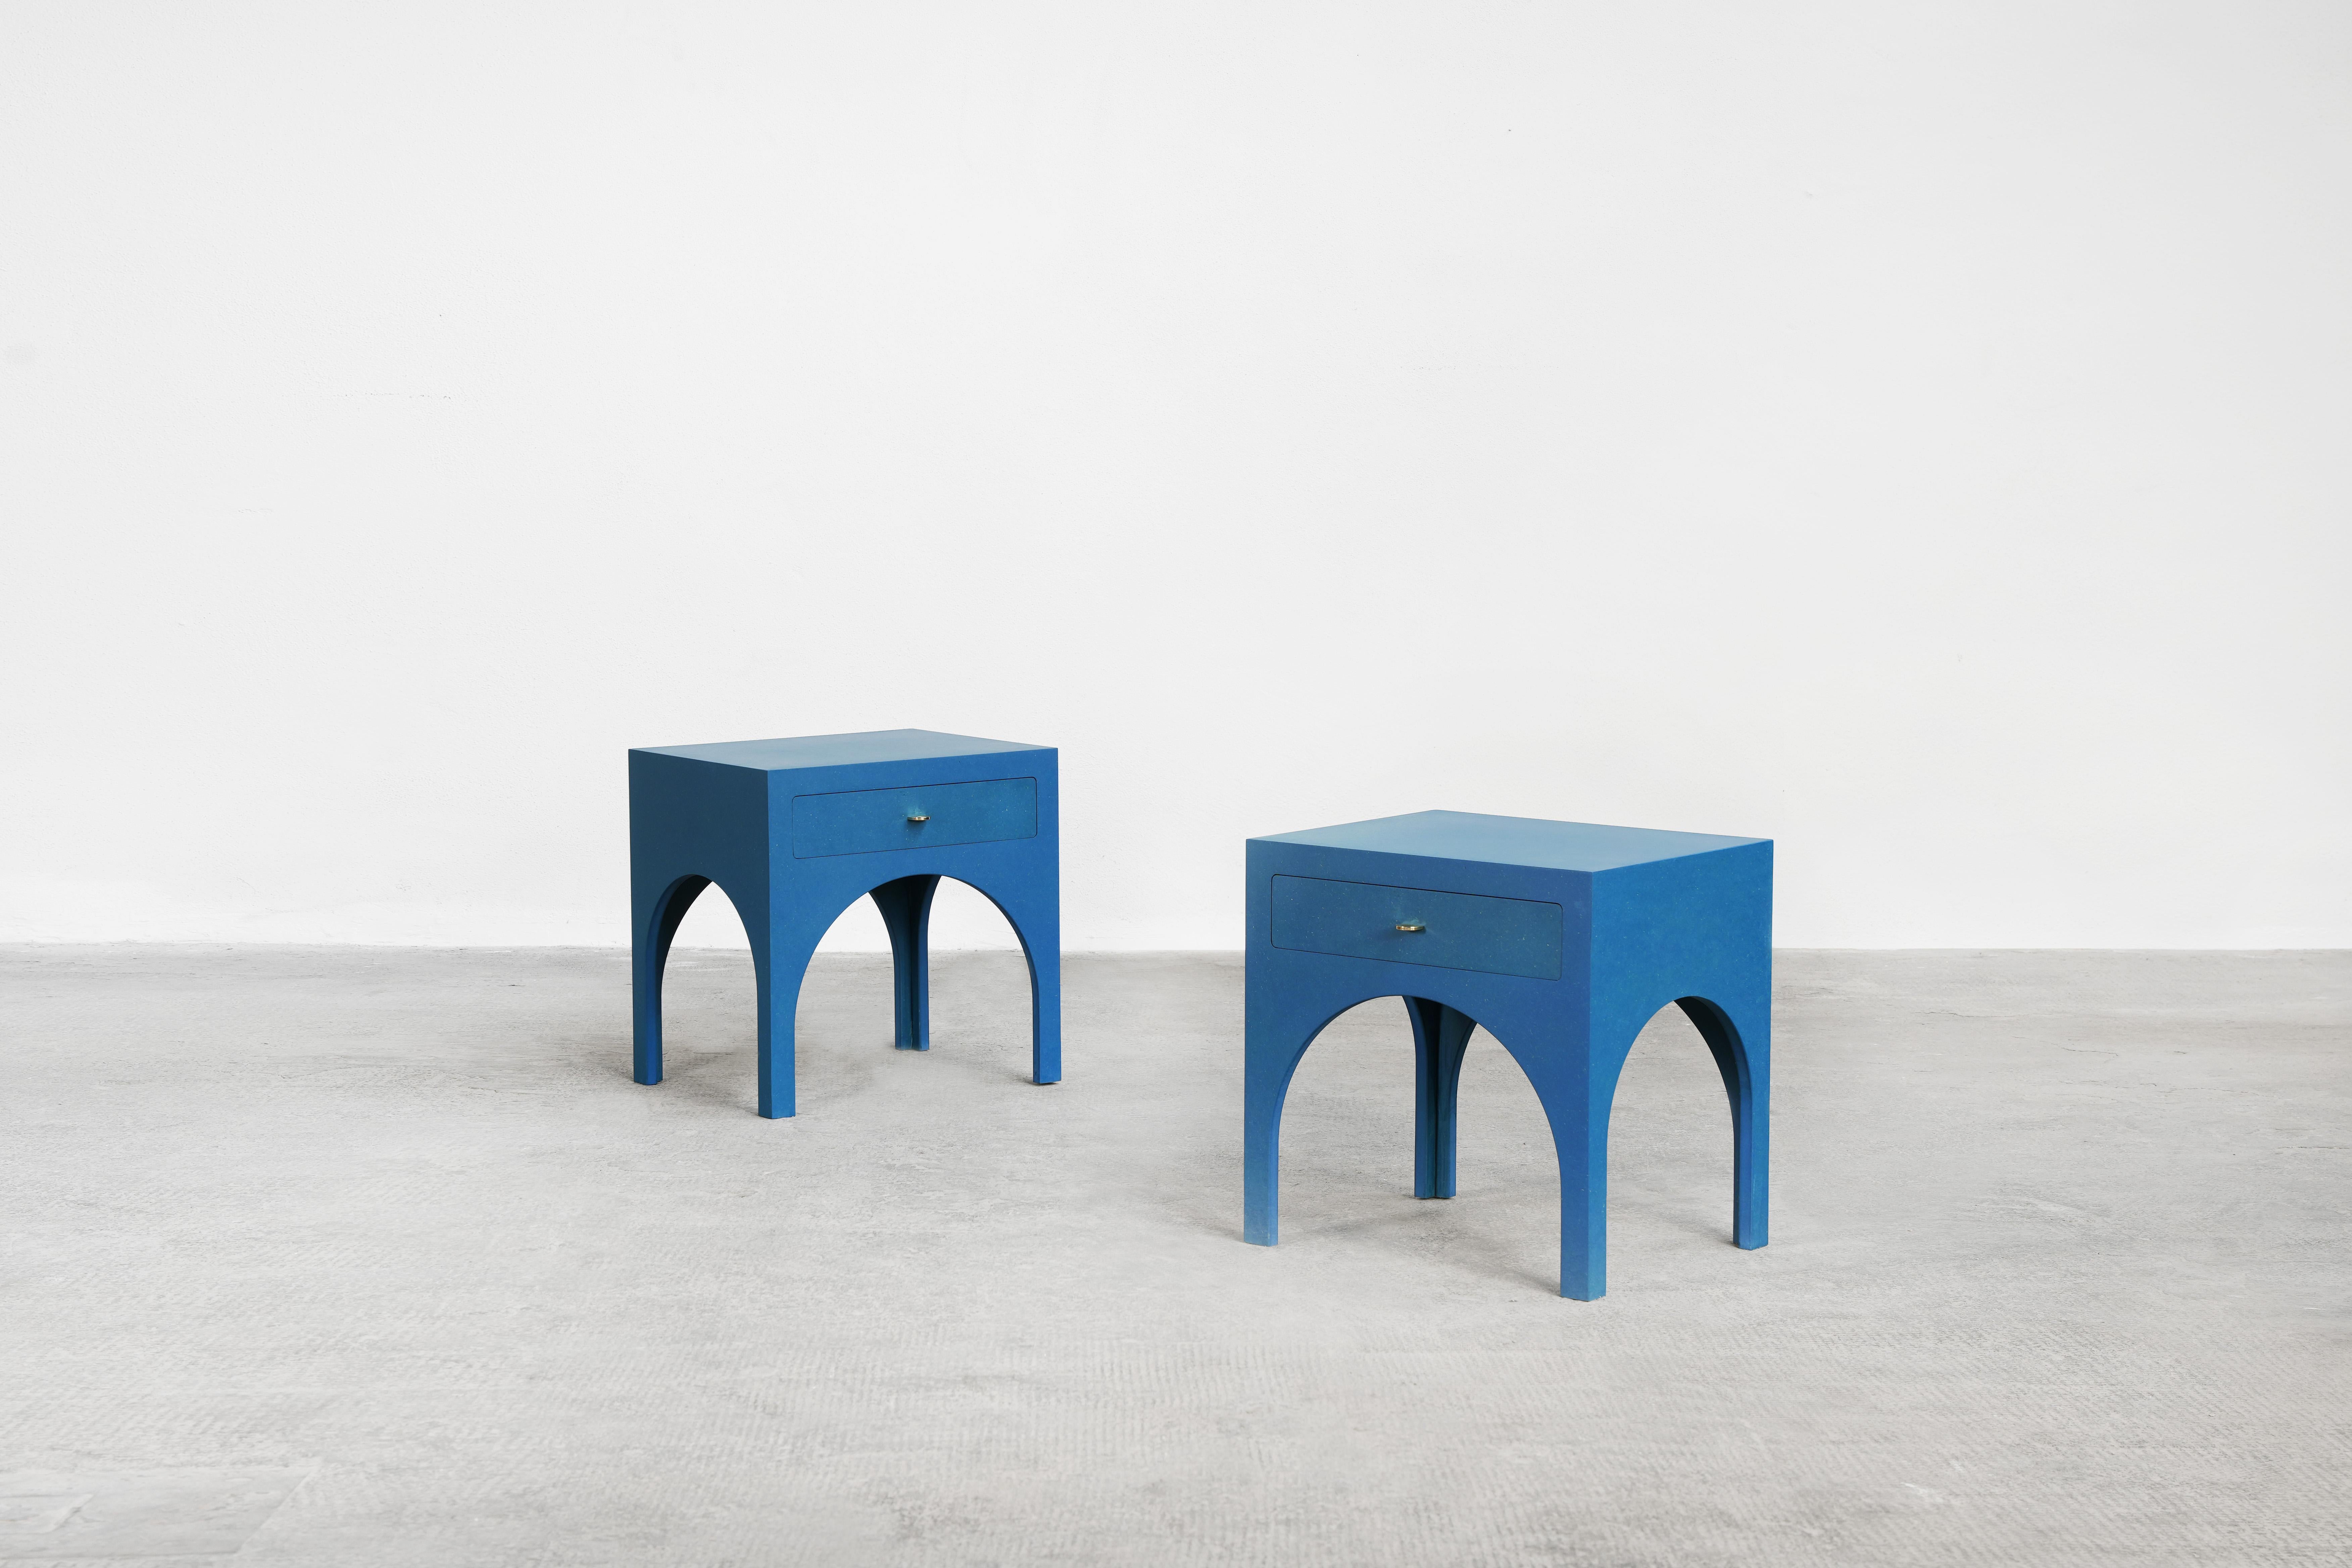 A beautiful pair of nightstands designed by Yuzo Bachmann for Atelier Bachmann, handcrafted in Germany, 2019.
These nightstands are made out of blue valchromat and brass handles. Finished with natural furniture wax.

Available made to order within